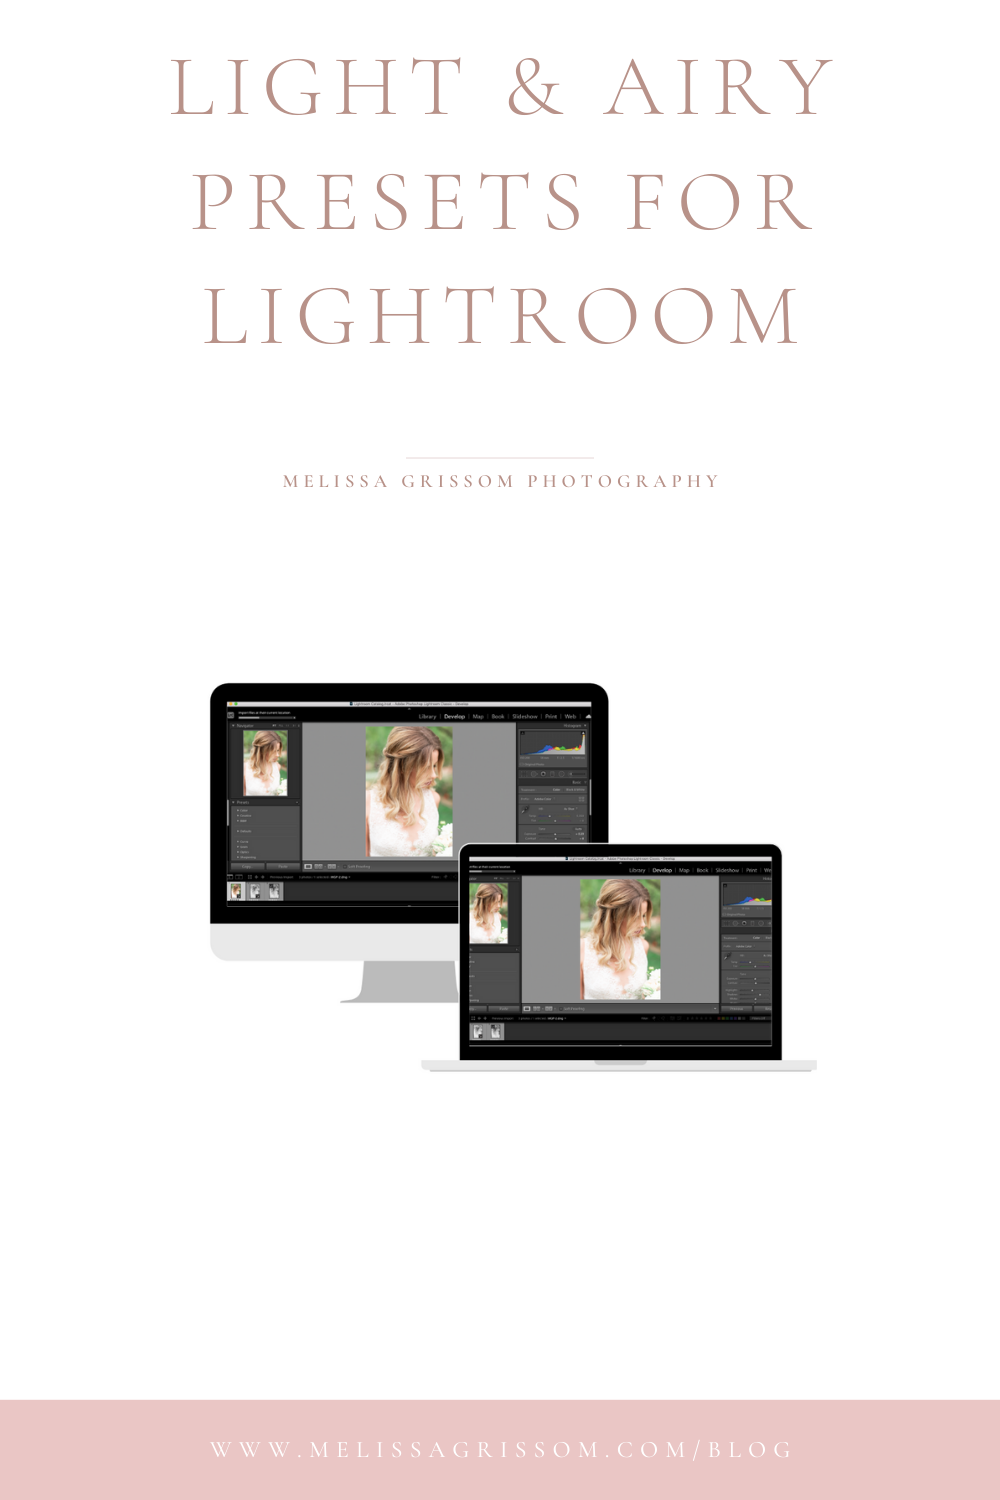 GRAPHIC TEXT OF LIGHT AND AIRY PRESETS FOR LIGHTROOM BY MELISSA GRISSOM